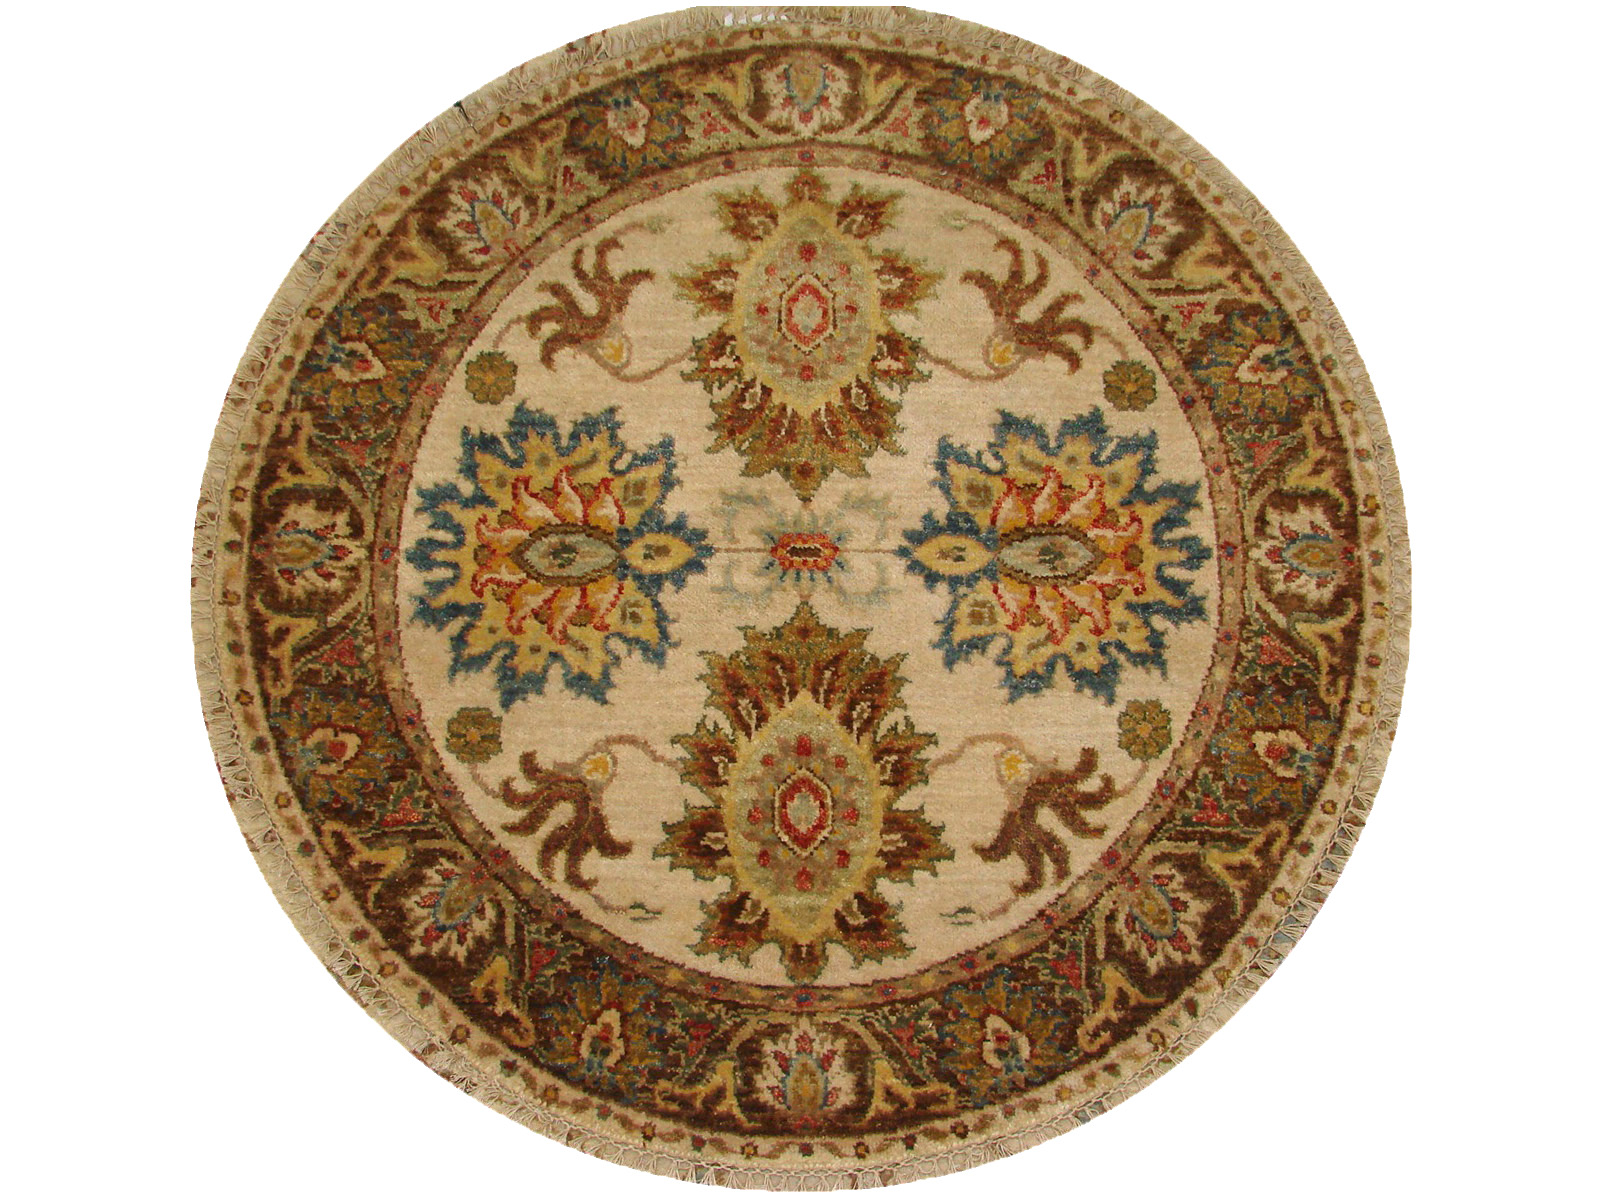 3 Round & Square Traditional Hand Knotted Wool Area Rug - MR21208